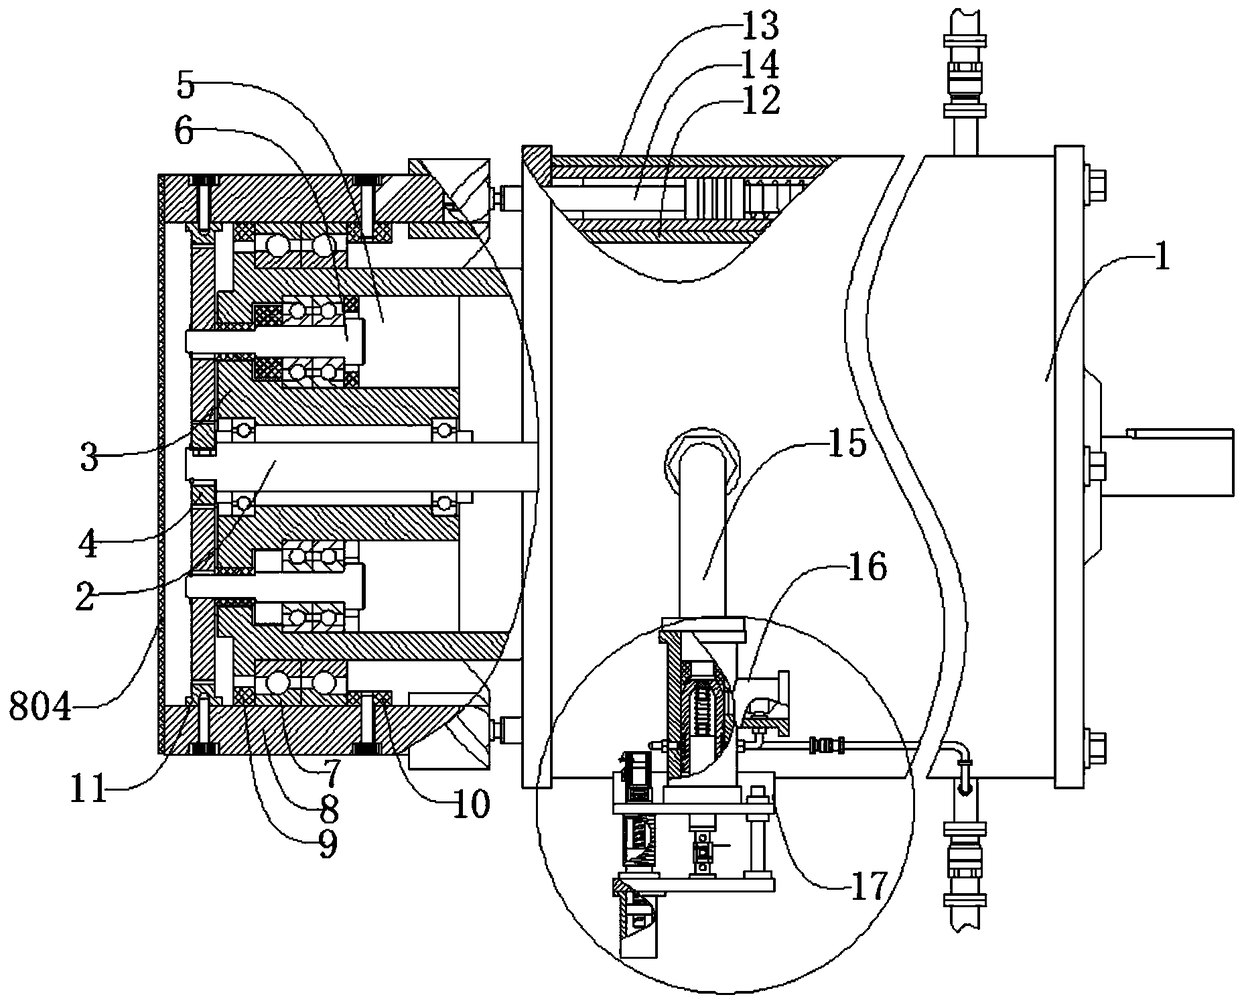 Water-cooled motor with adjustable coolant pressure